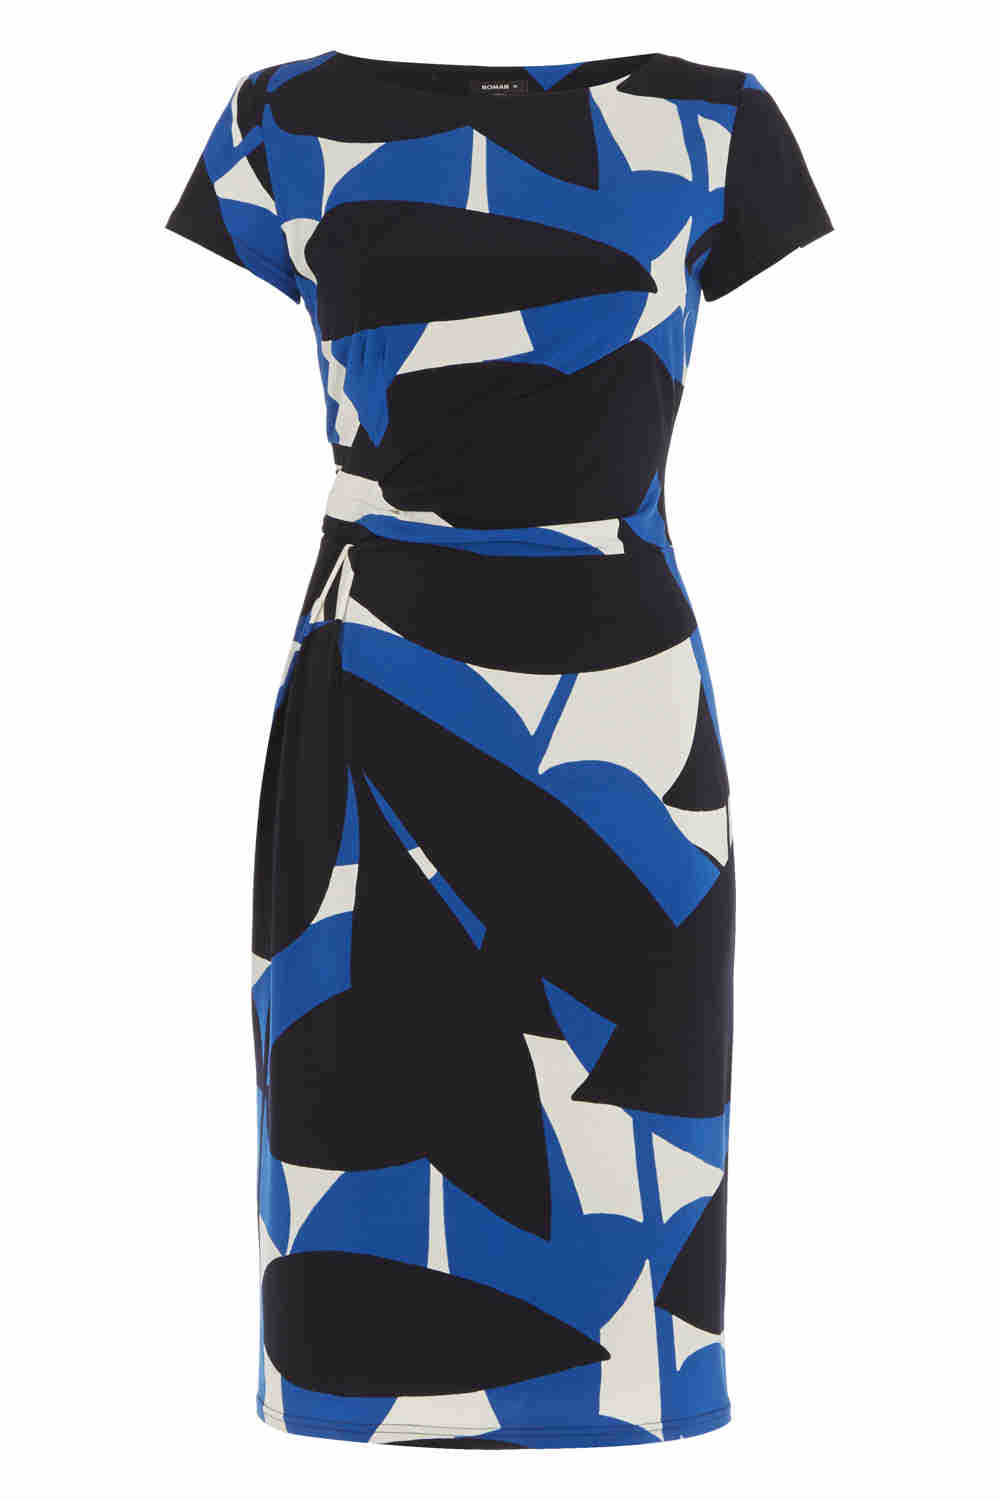 Blue Abstract Leaf Print Jersey Dress, Image 4 of 5